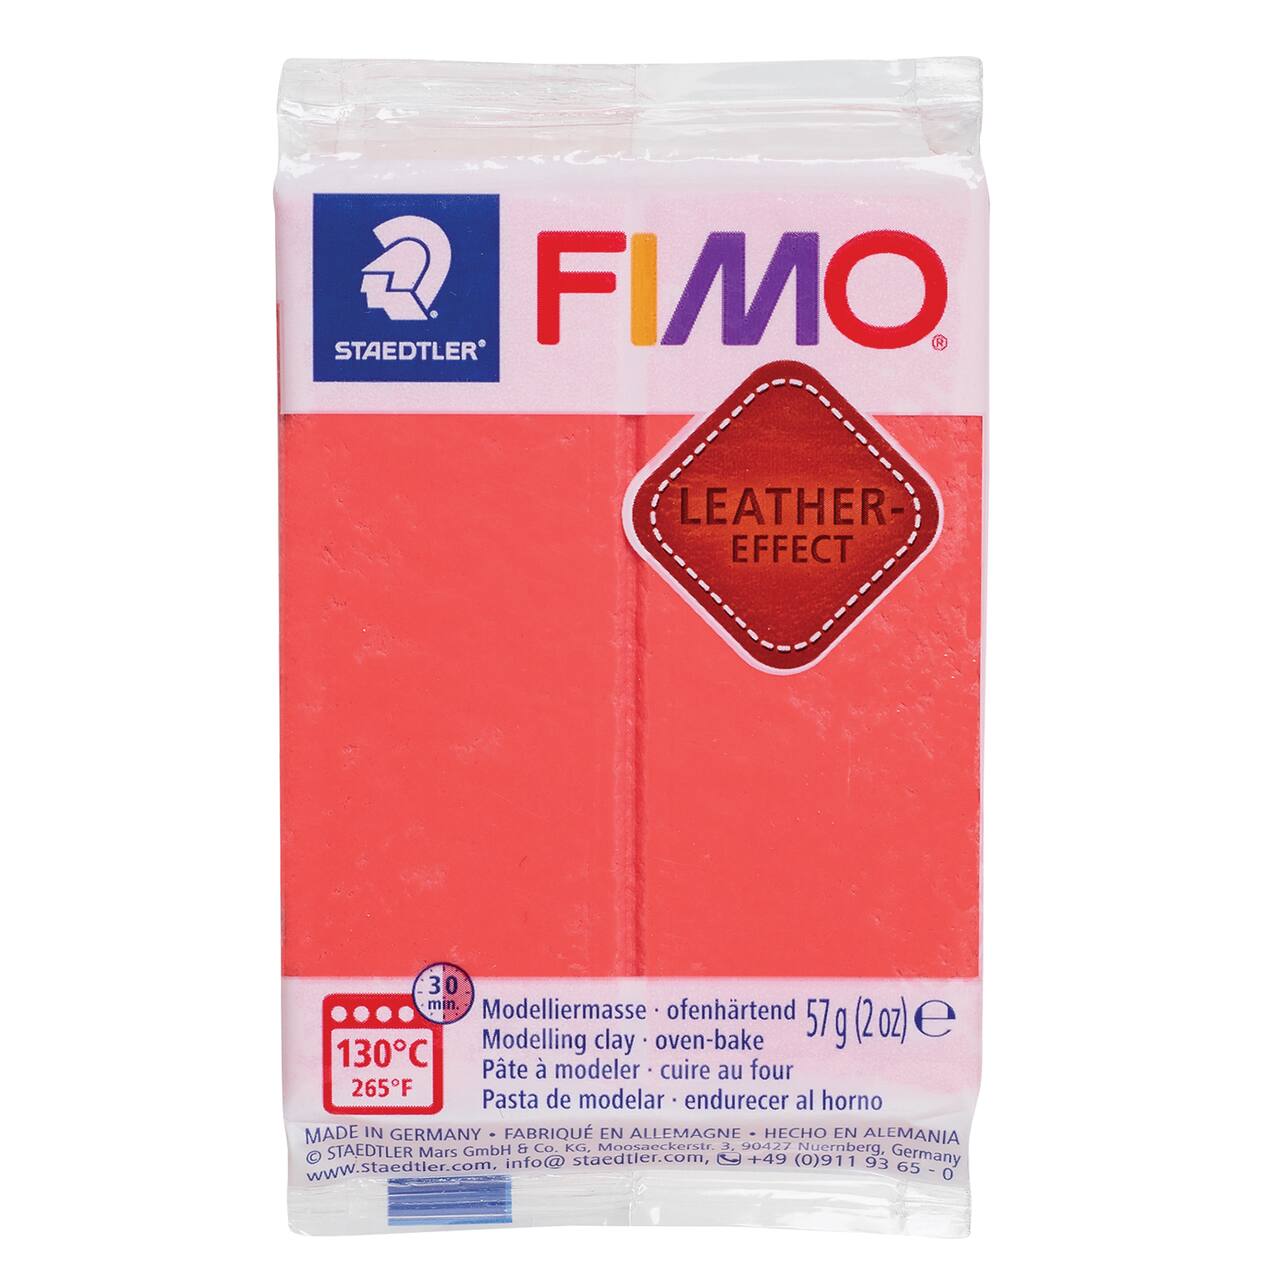 Staedtler&#xAE; FIMO&#xAE; Leather-Effect Oven-Bake Modelling Clay